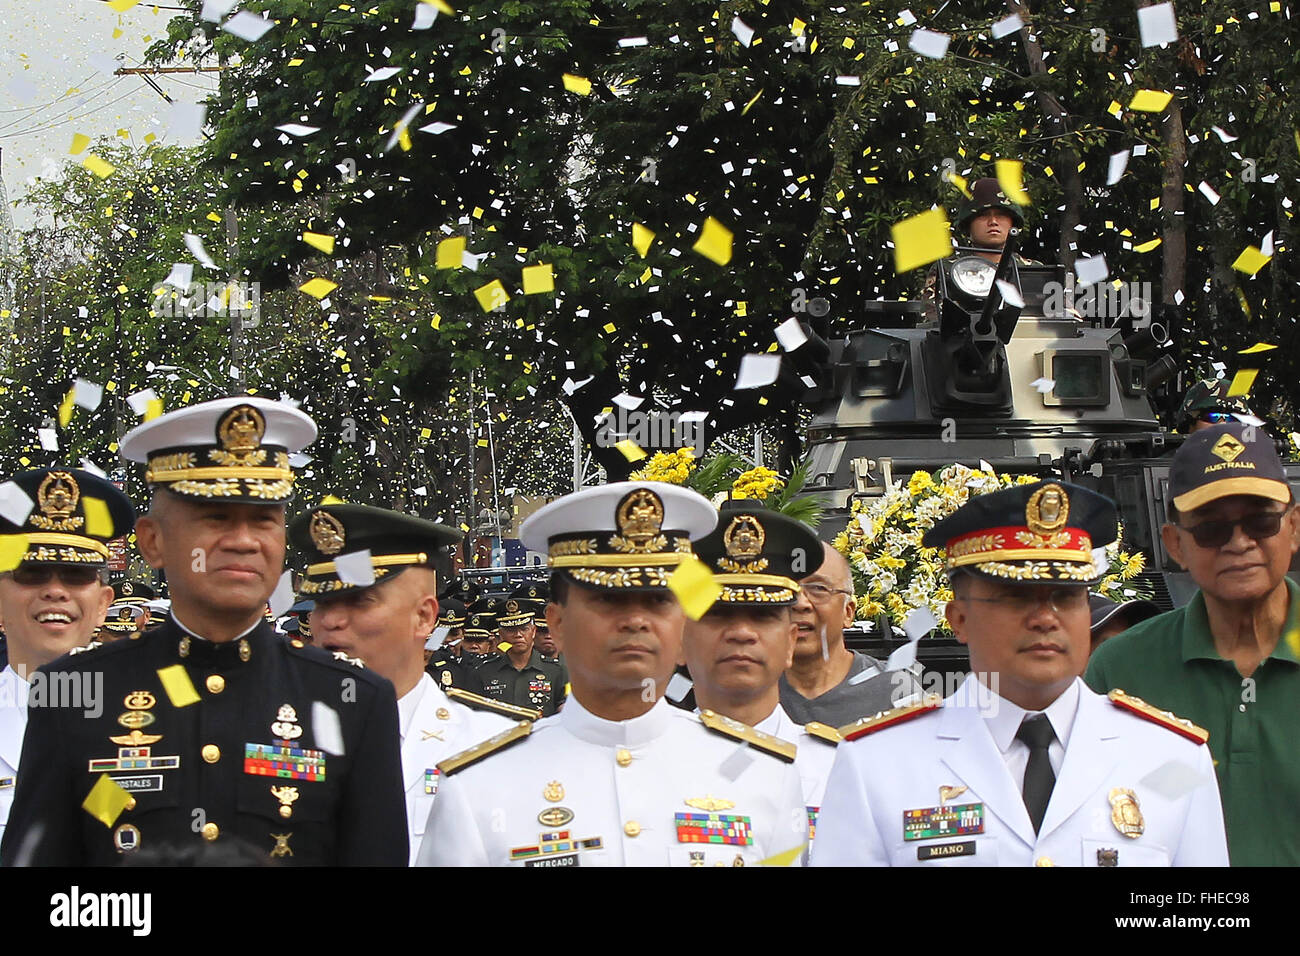 Quezon City, Philippines. 25th Feb, 2016. Confetti rains down on military officers during the 30th anniversary of the People Power Revolution in Quezon City, the Philippines, Feb. 25, 2016. Filipinos on Thursday celebrated the 30th anniversary of the People Power Revolution, an event that toppled the dictatorship of former President Ferdinand Marcos in 1986. Credit:  Rouelle Umali/Xinhua/Alamy Live News Stock Photo